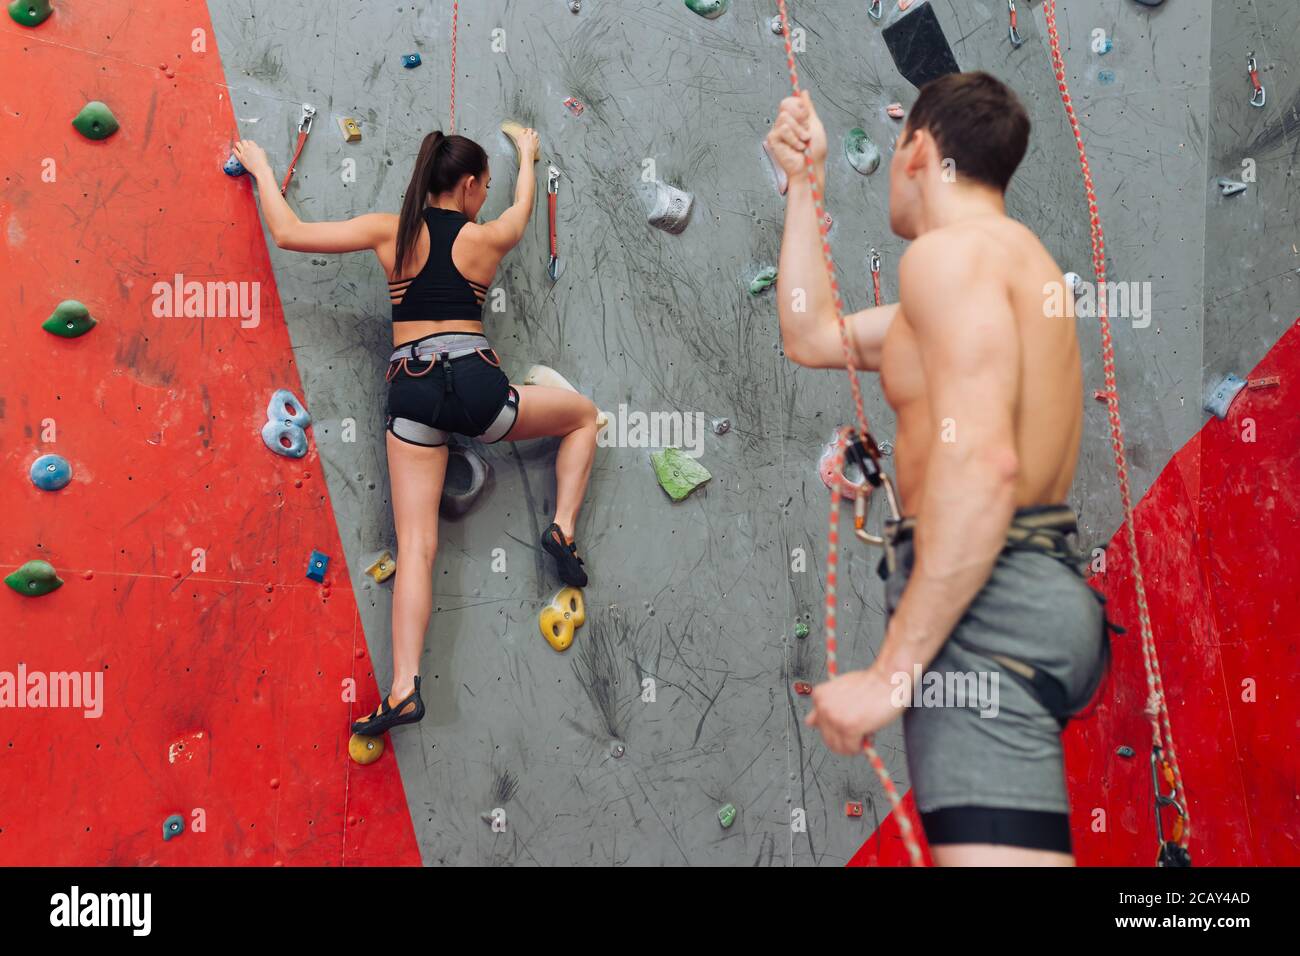 personal instructor worries about the girl's safety. lifestyle. man warning the woman to be attentive Stock Photo